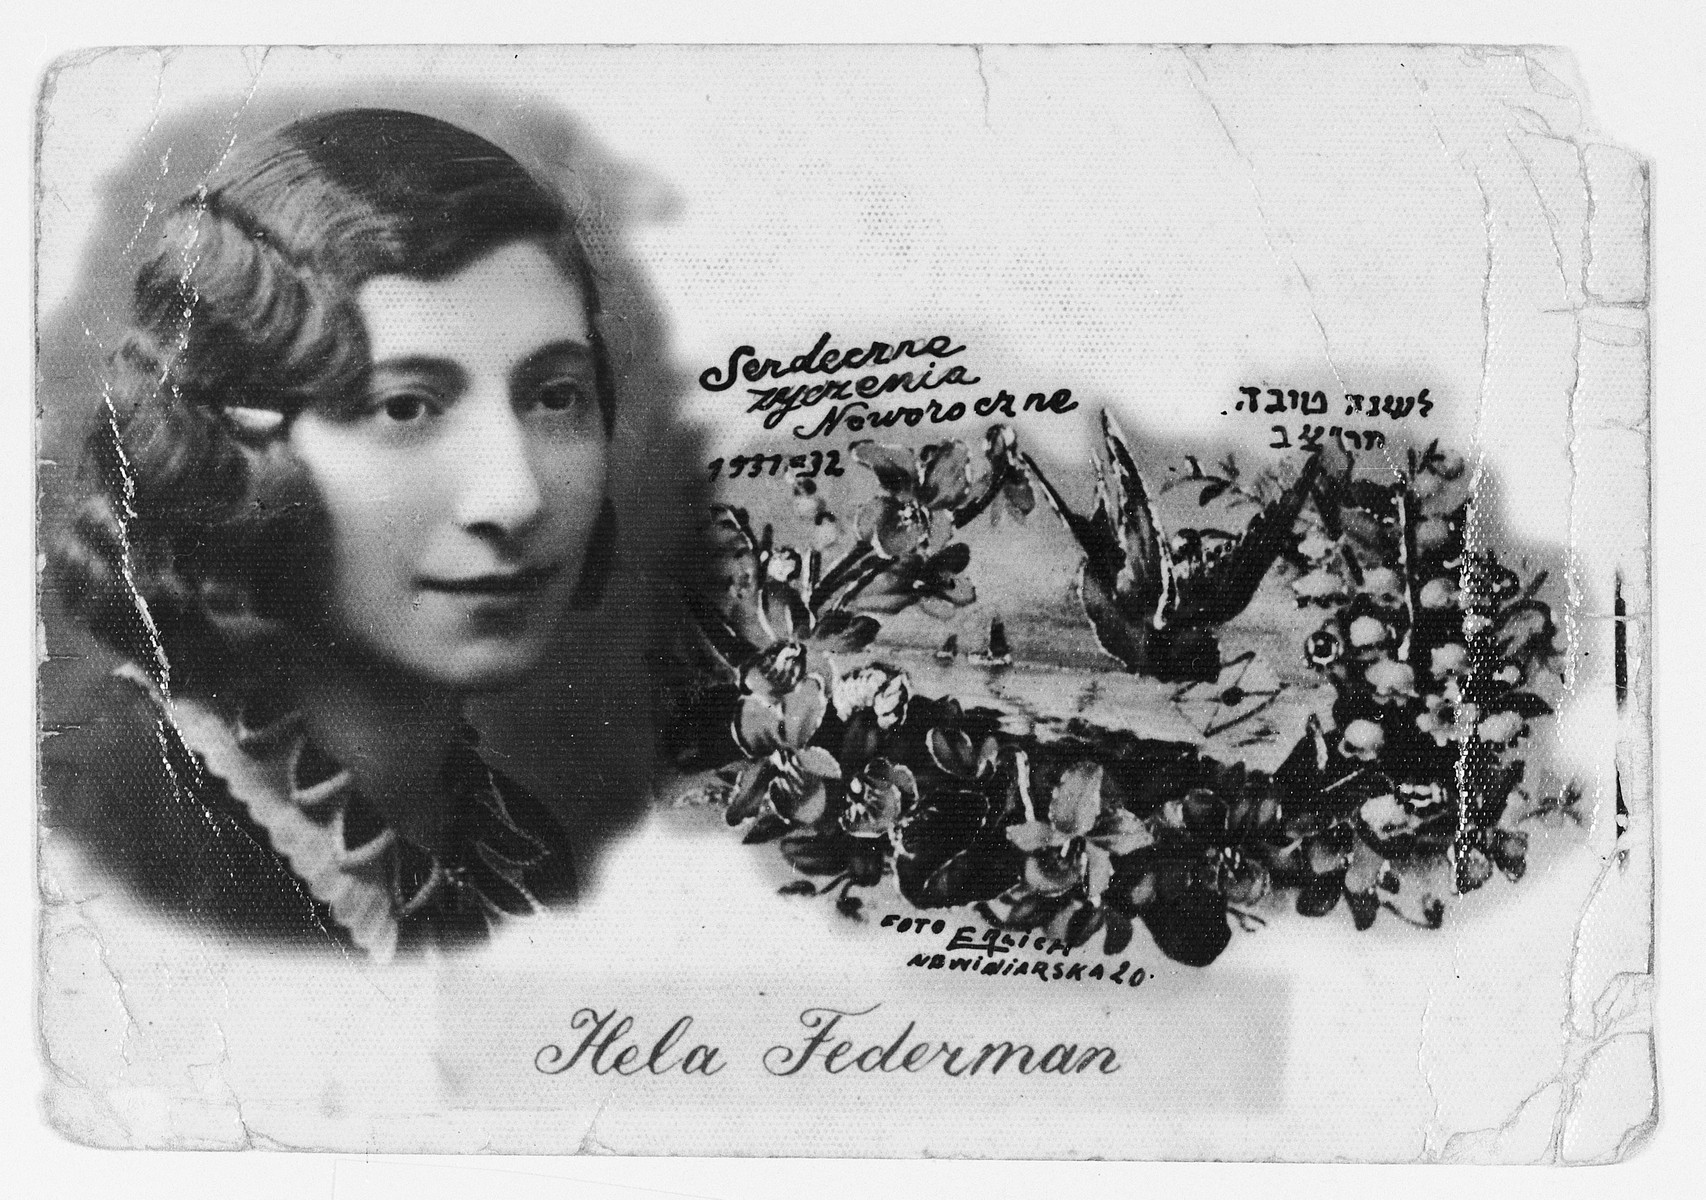 Jewish New Year's card sent by Hela Federman to her father Harry in the United States.

The inscription on the back reads, "As a memory to my most respected father.  This is my photo.  I wish you a New Year that will bring you health, prosperity and luck."